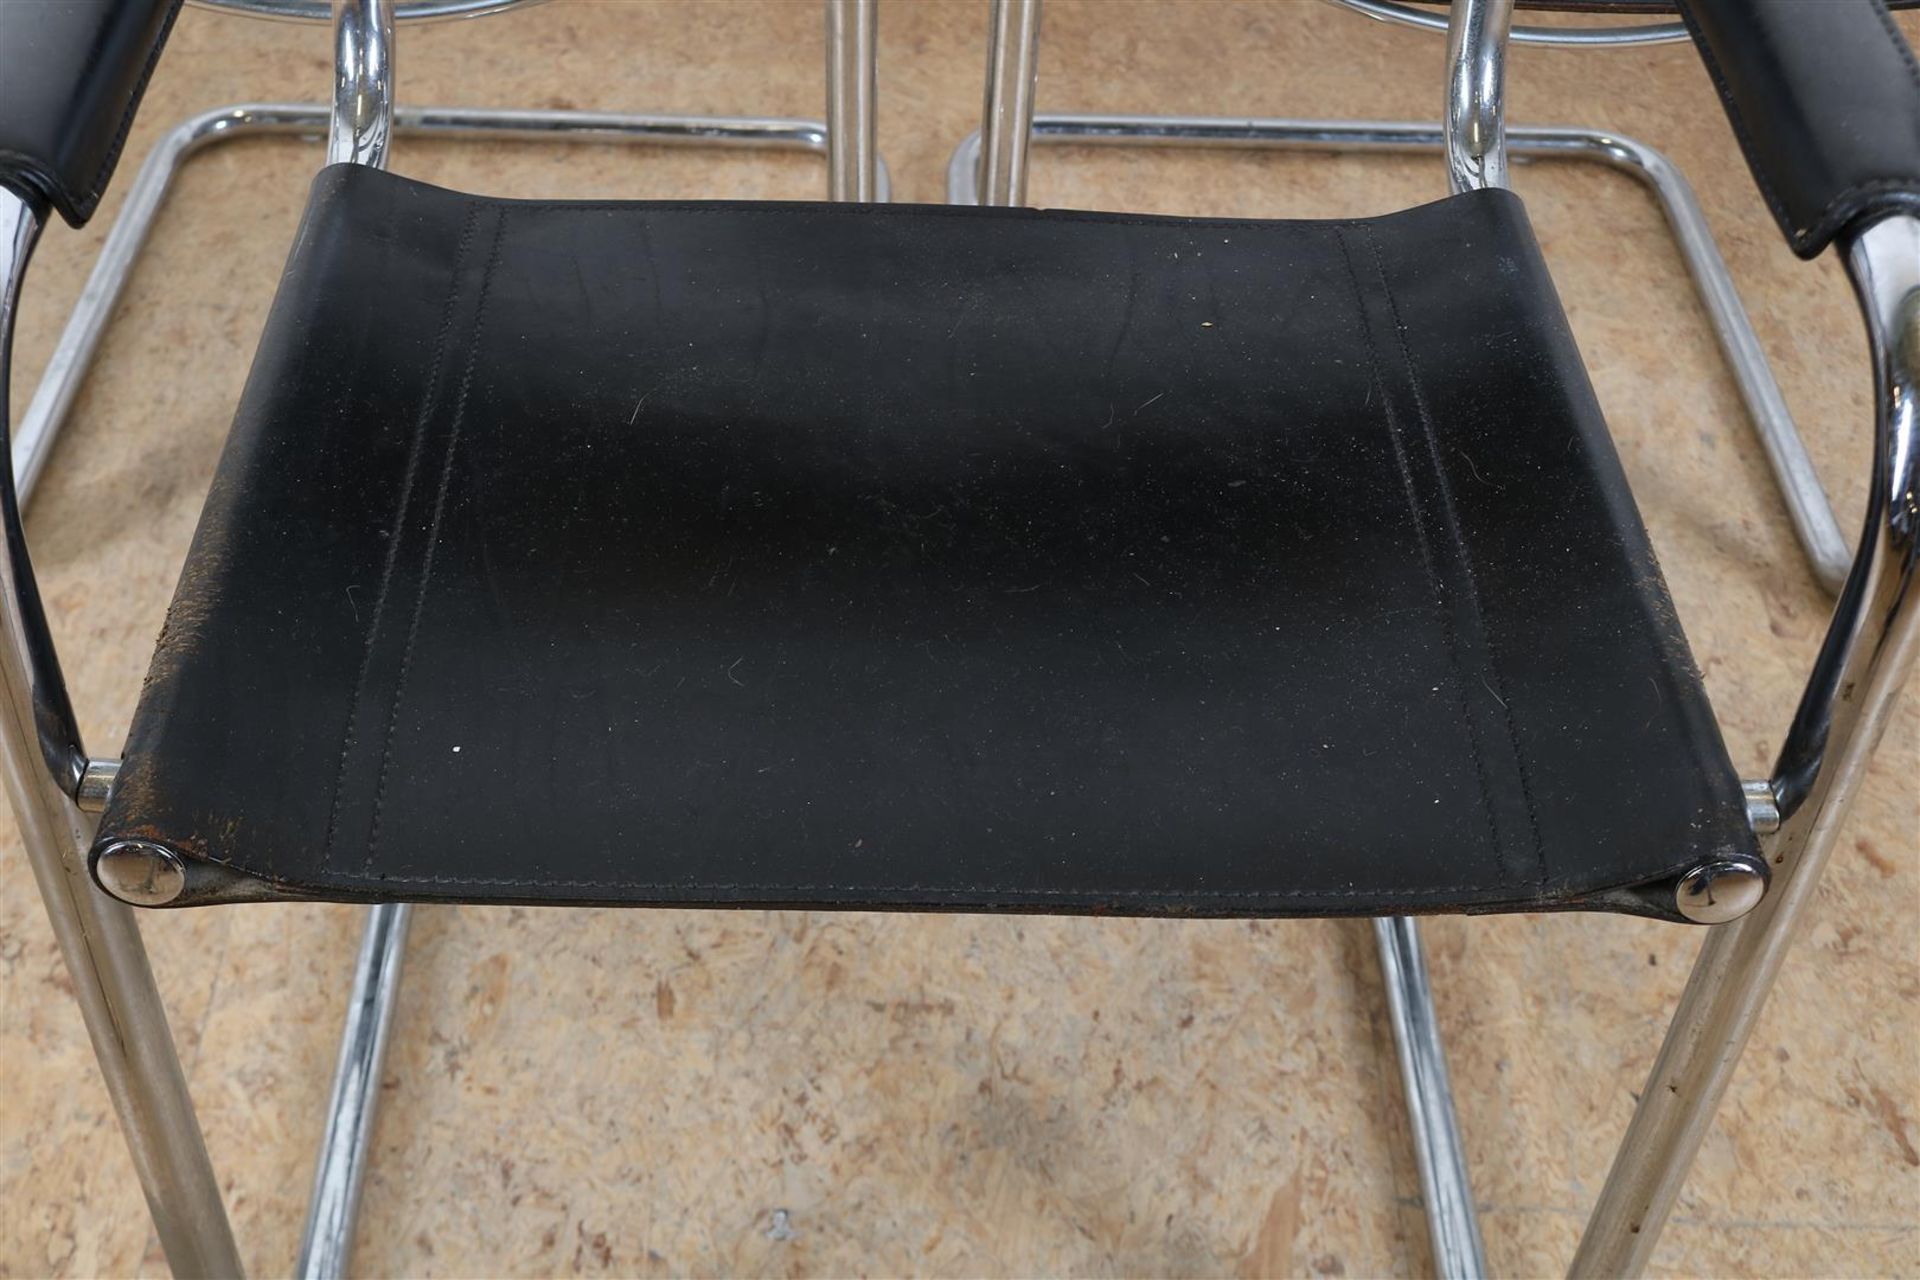 Series of 5 armchairs upholstered in black leather on a chrome tube base, after designer Marcel - Image 2 of 6